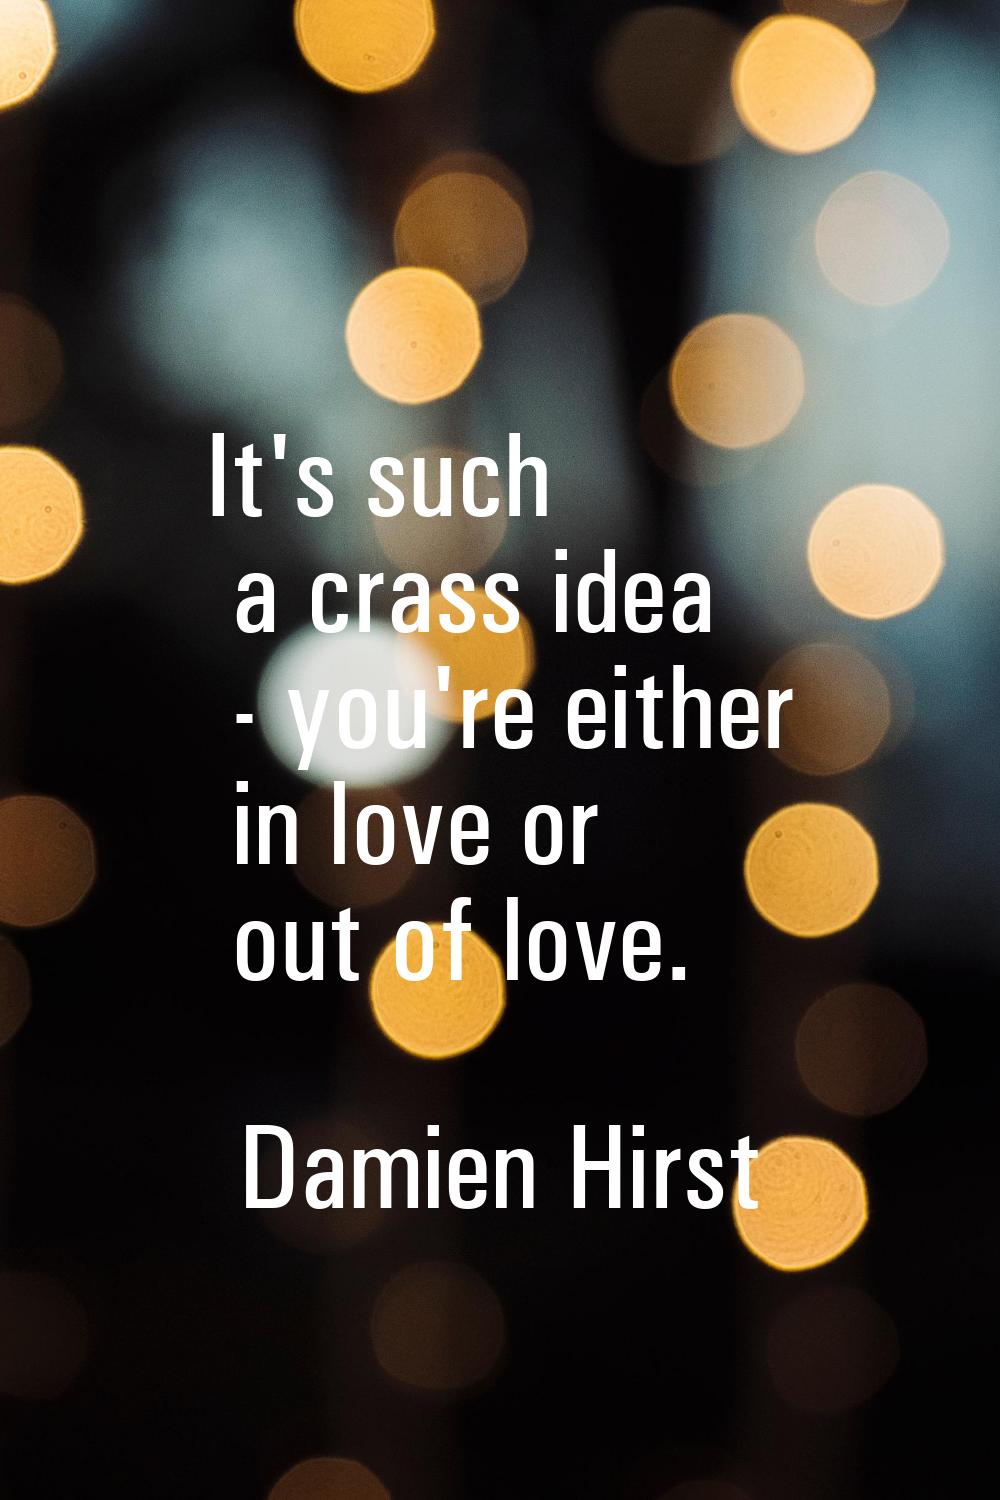 It's such a crass idea - you're either in love or out of love.